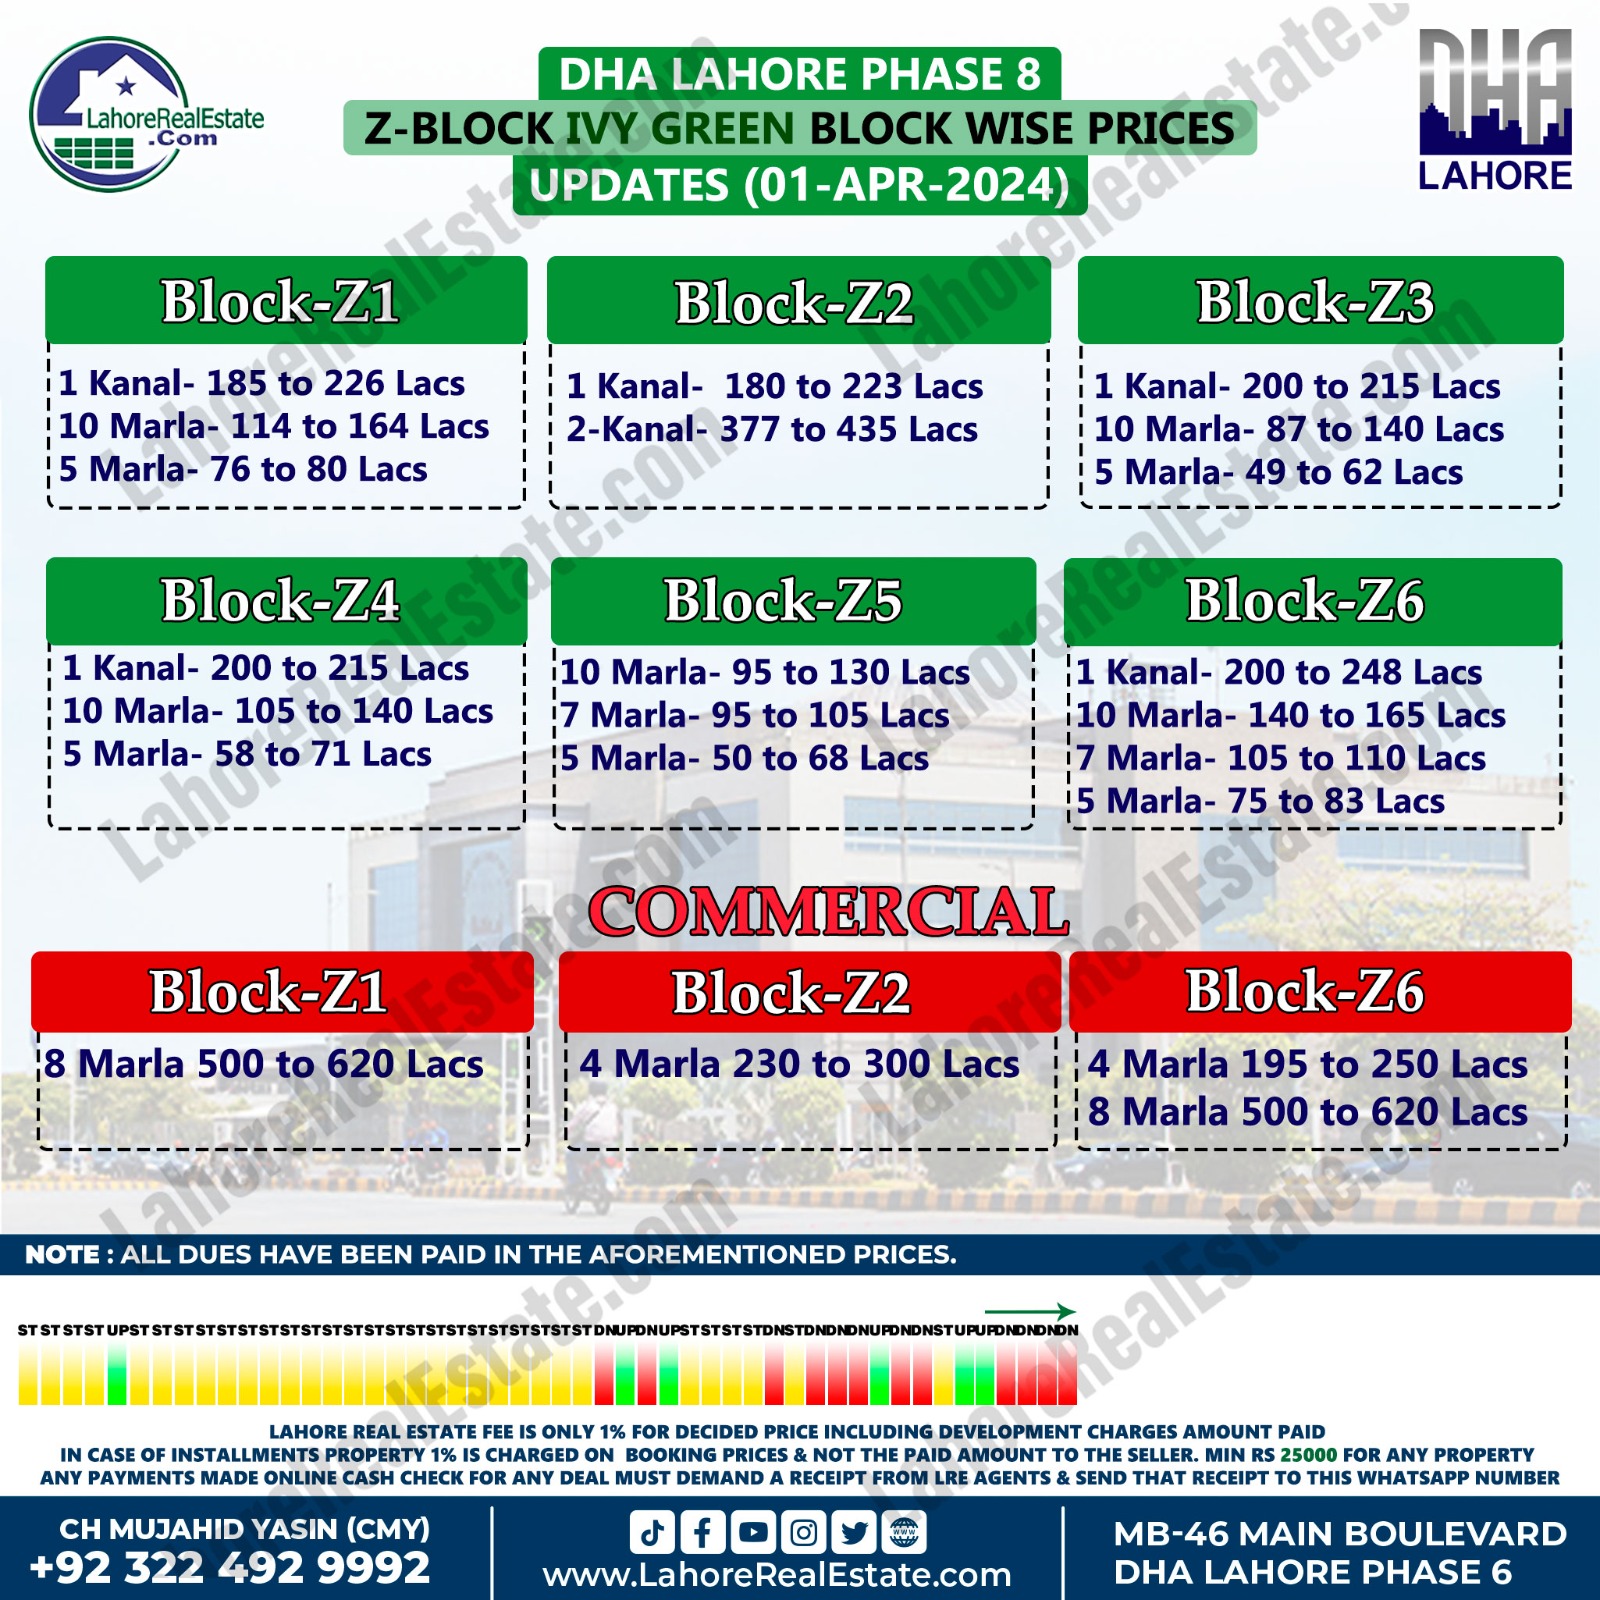 DHA Lahore Phase 8 Block Z IVY Green Plot Prices Update April 02, 2024